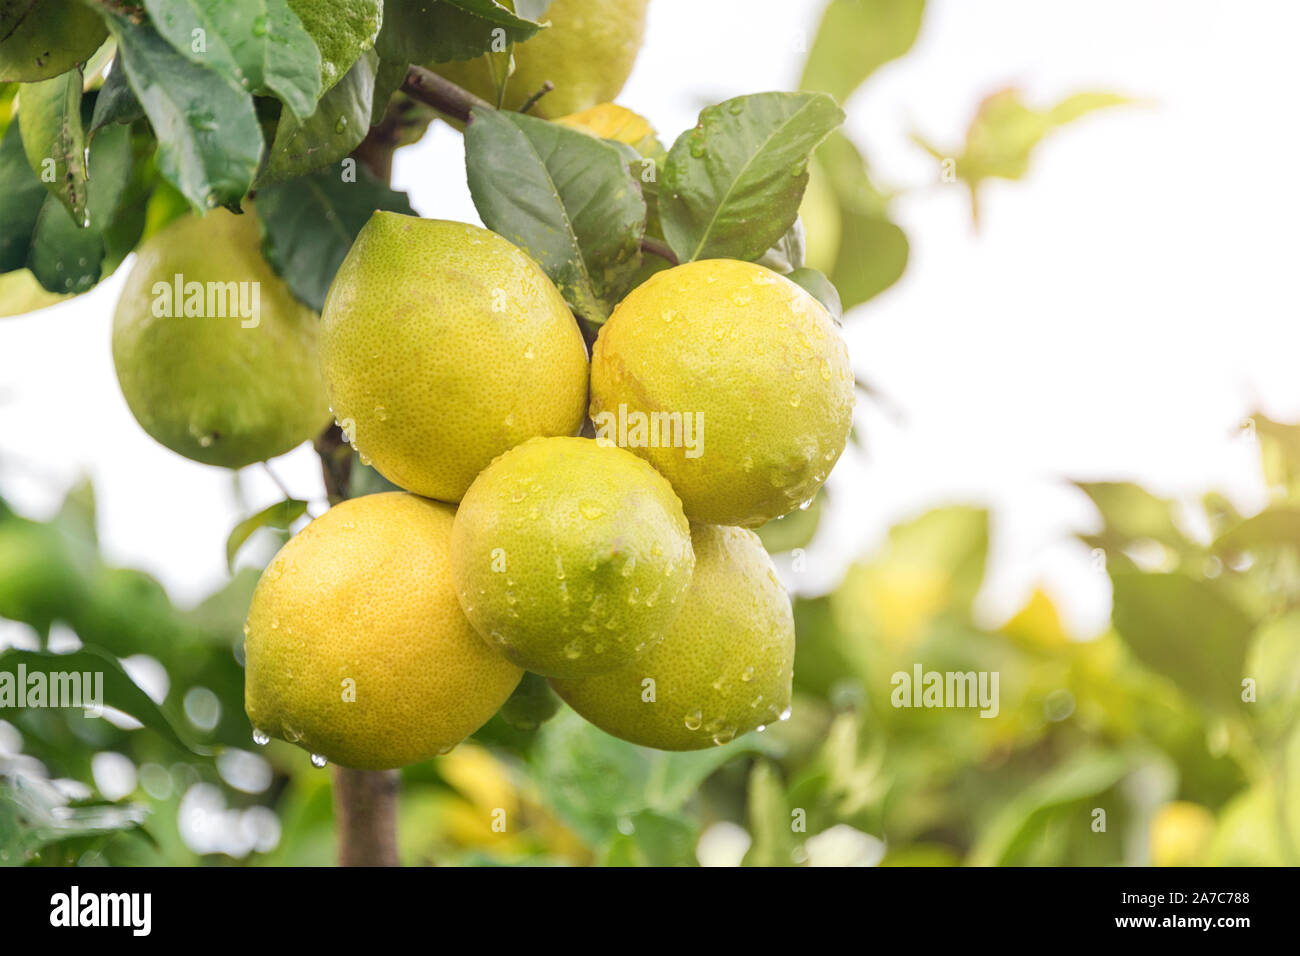 Ripening fruits lemon tree close up. Fresh green lemon limes with water drops hanging on tree branch in organic garden Stock Photo